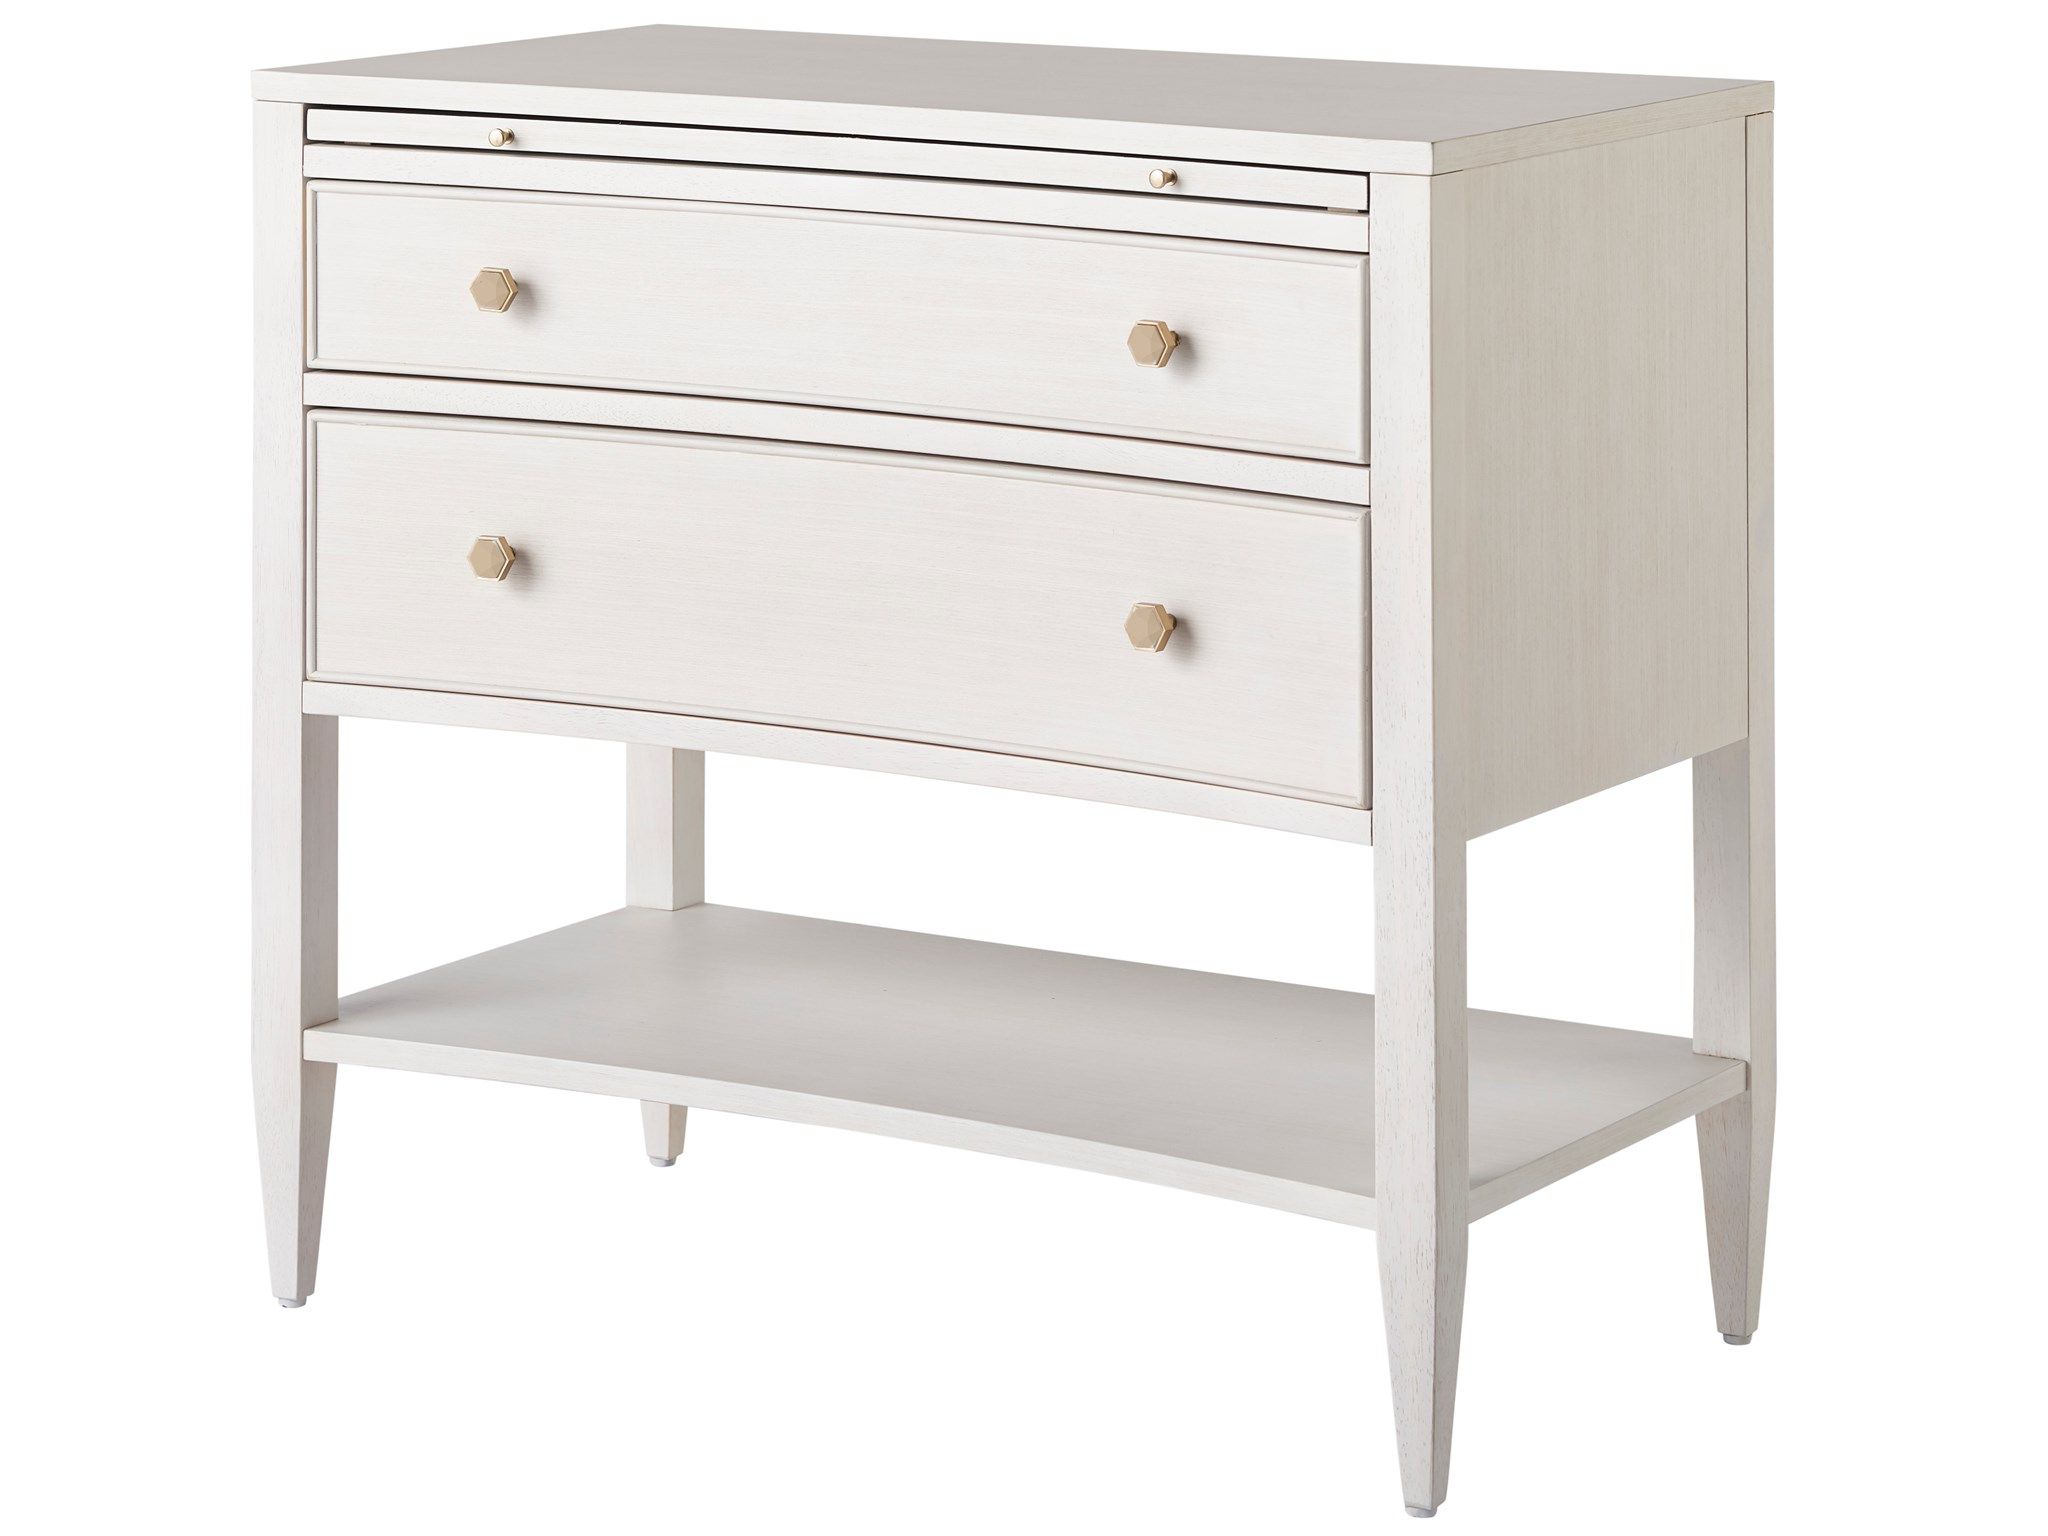 Miranda Kerr Home Chelsea Nightstand | Savvy Furniture For Rey Coastal Chic Universal Console 2 Drawer Tv Stands (View 12 of 20)